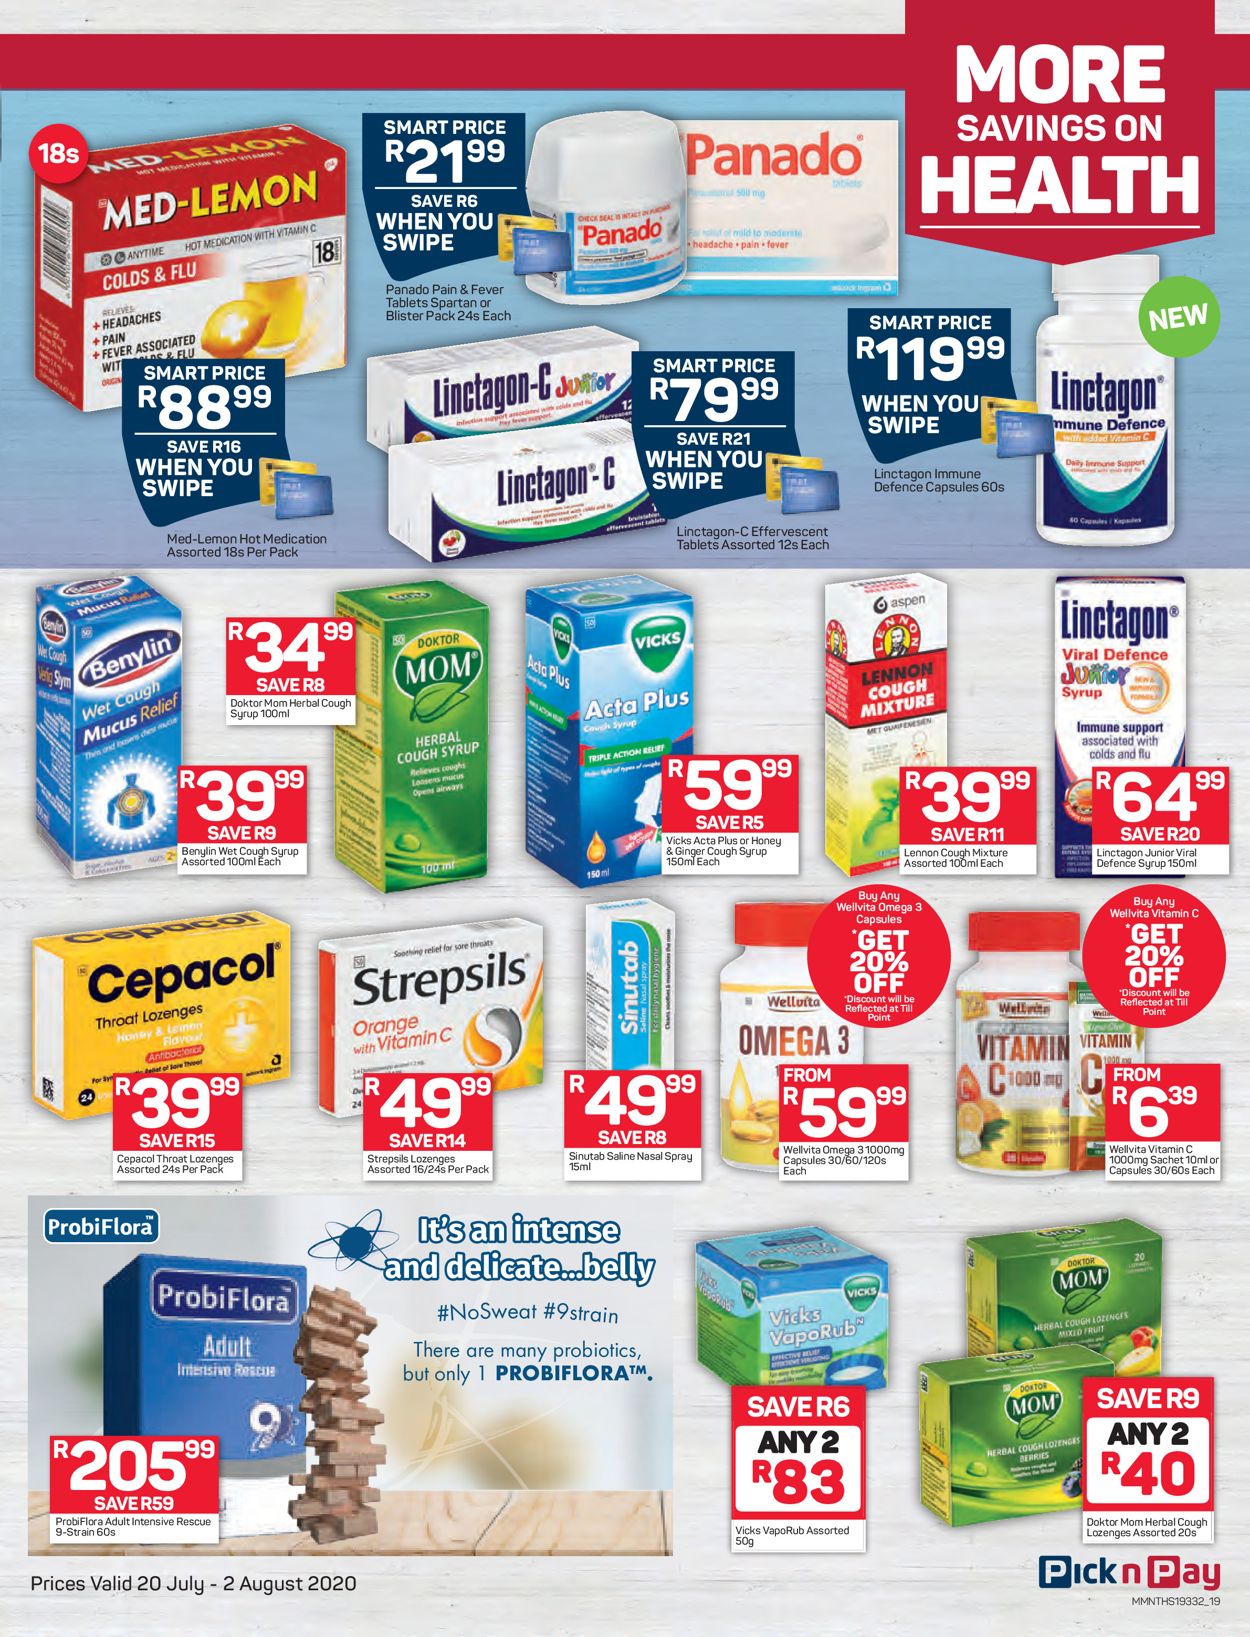 Pick n Pay Catalogue - 2020/07/20-2020/08/02 (Page 19)